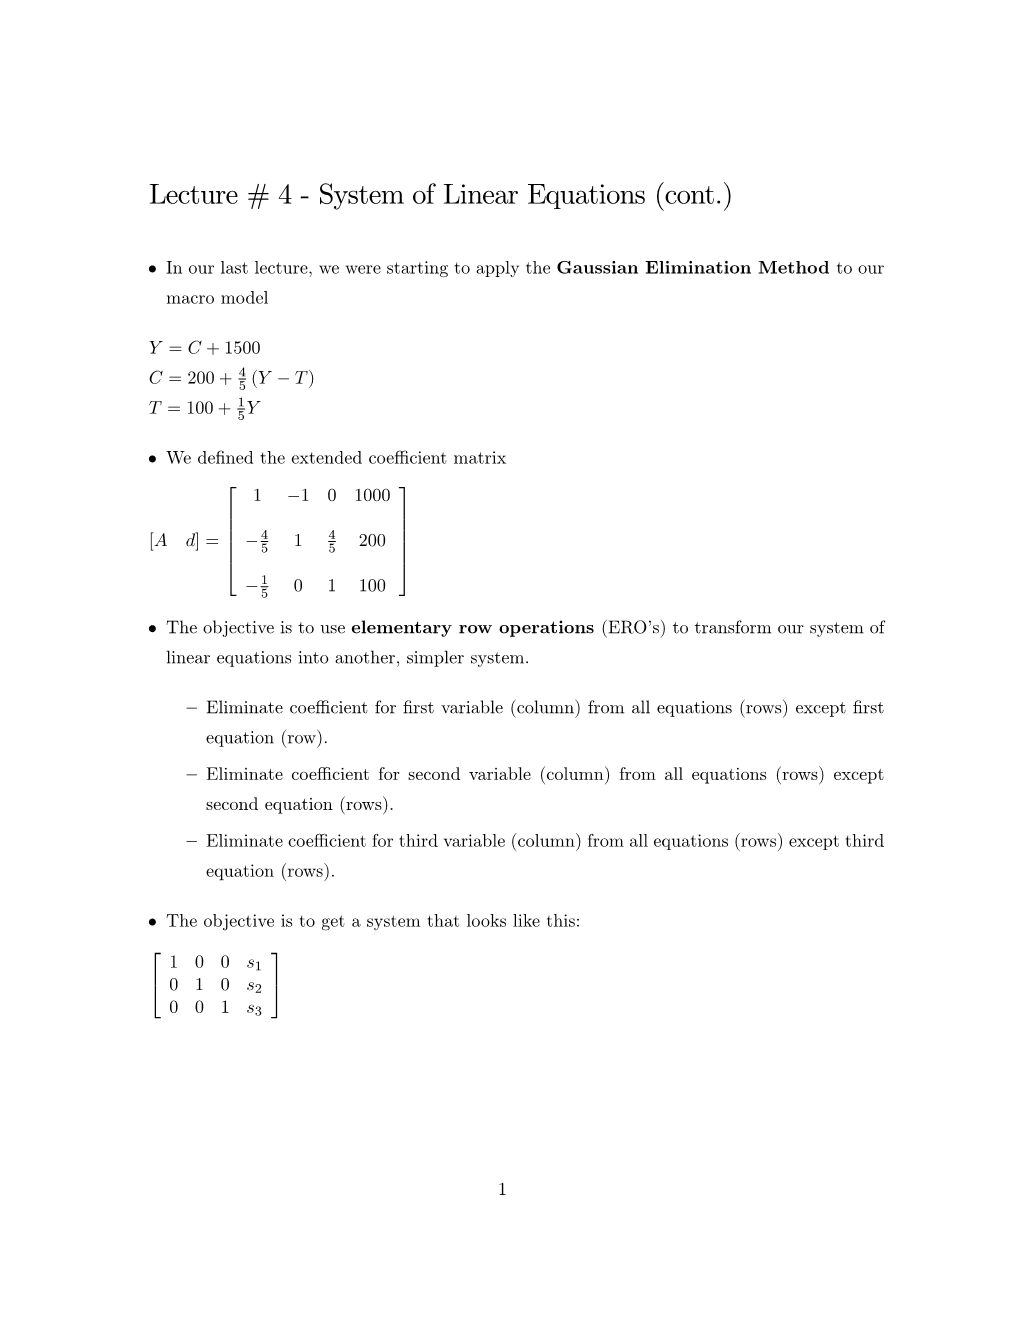 Lecture # 4 % System of Linear Equations (Cont.)